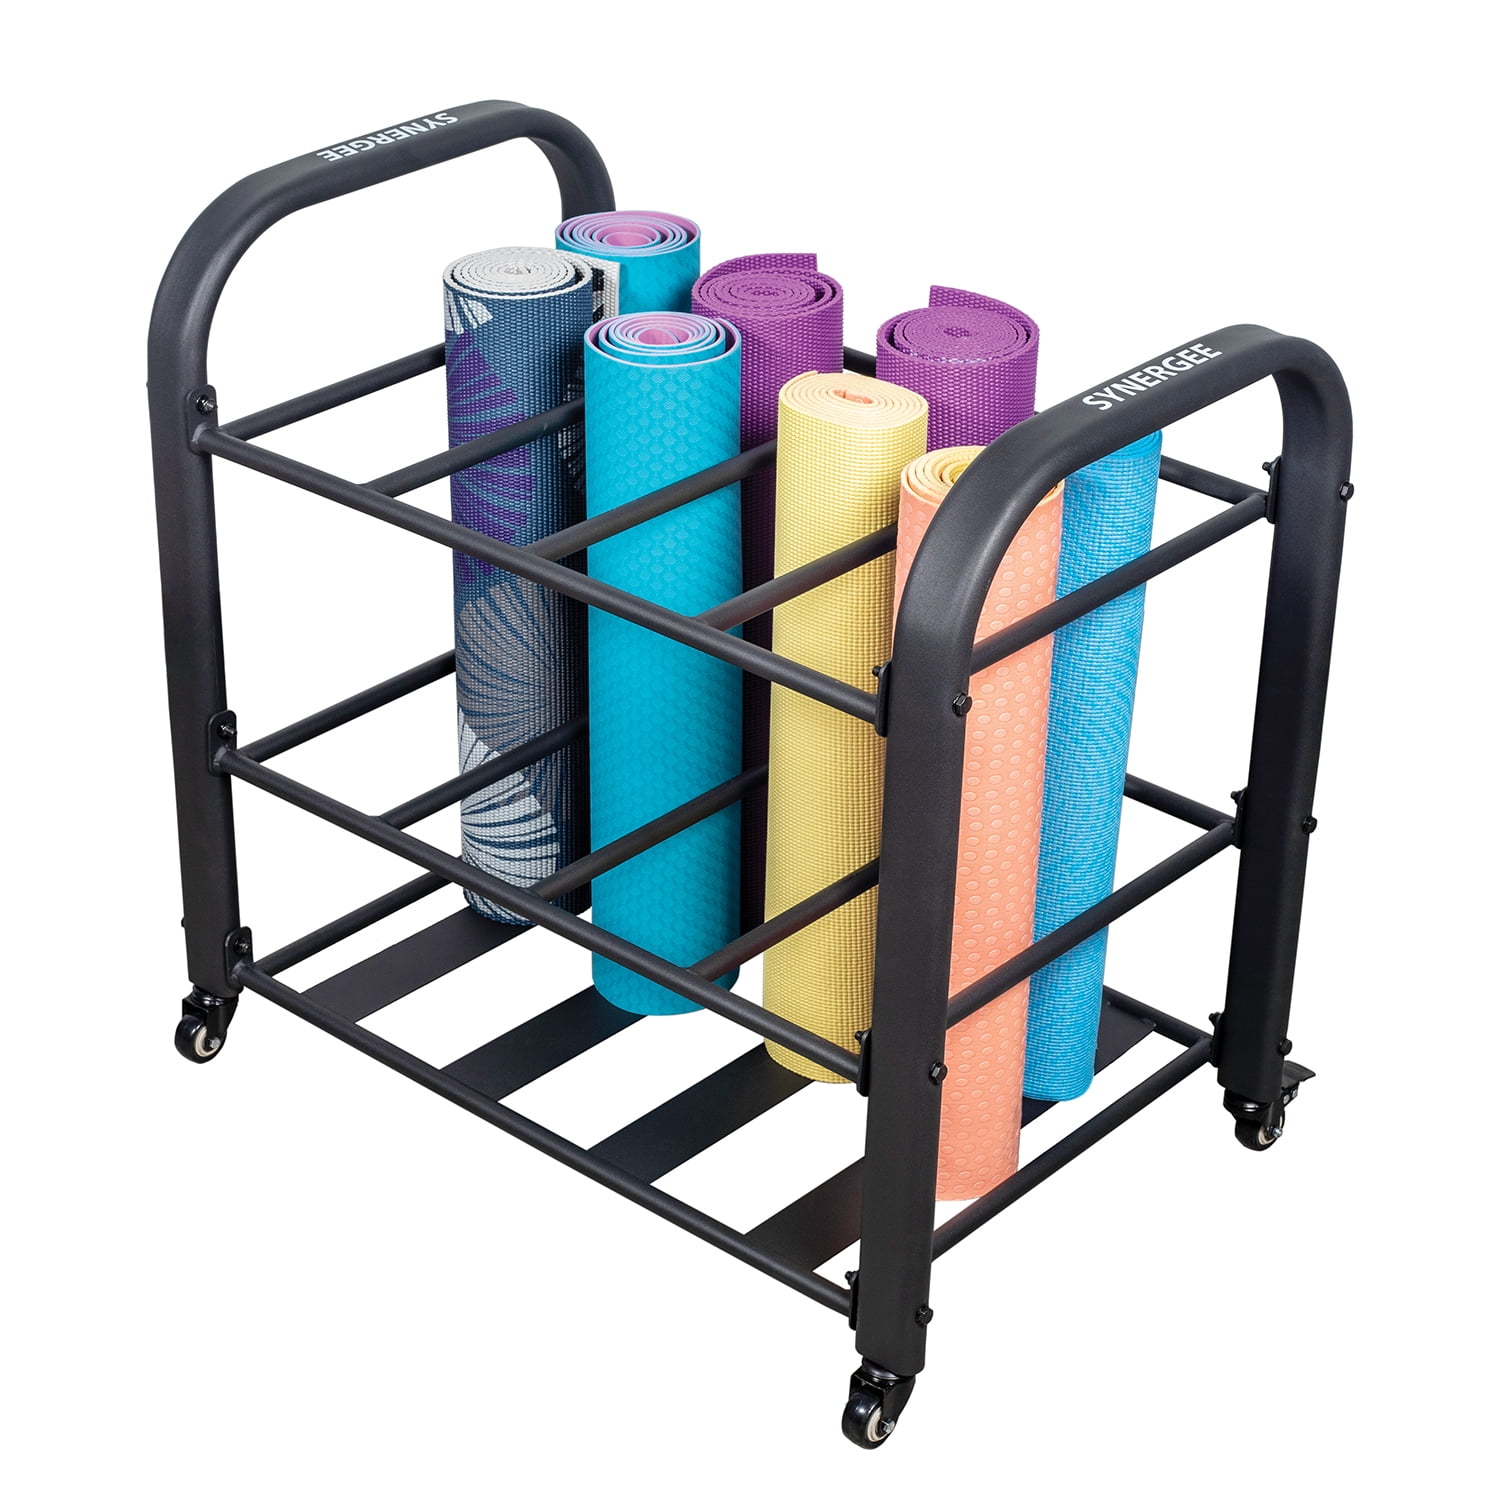 Rolling/Mobile Yoga Mat Storage Organizer Holder Cart with Locable Wheels,  Large Capacity Heavy Duty Foam Roller Rack Stand, Home/Yoga Studio/Gym